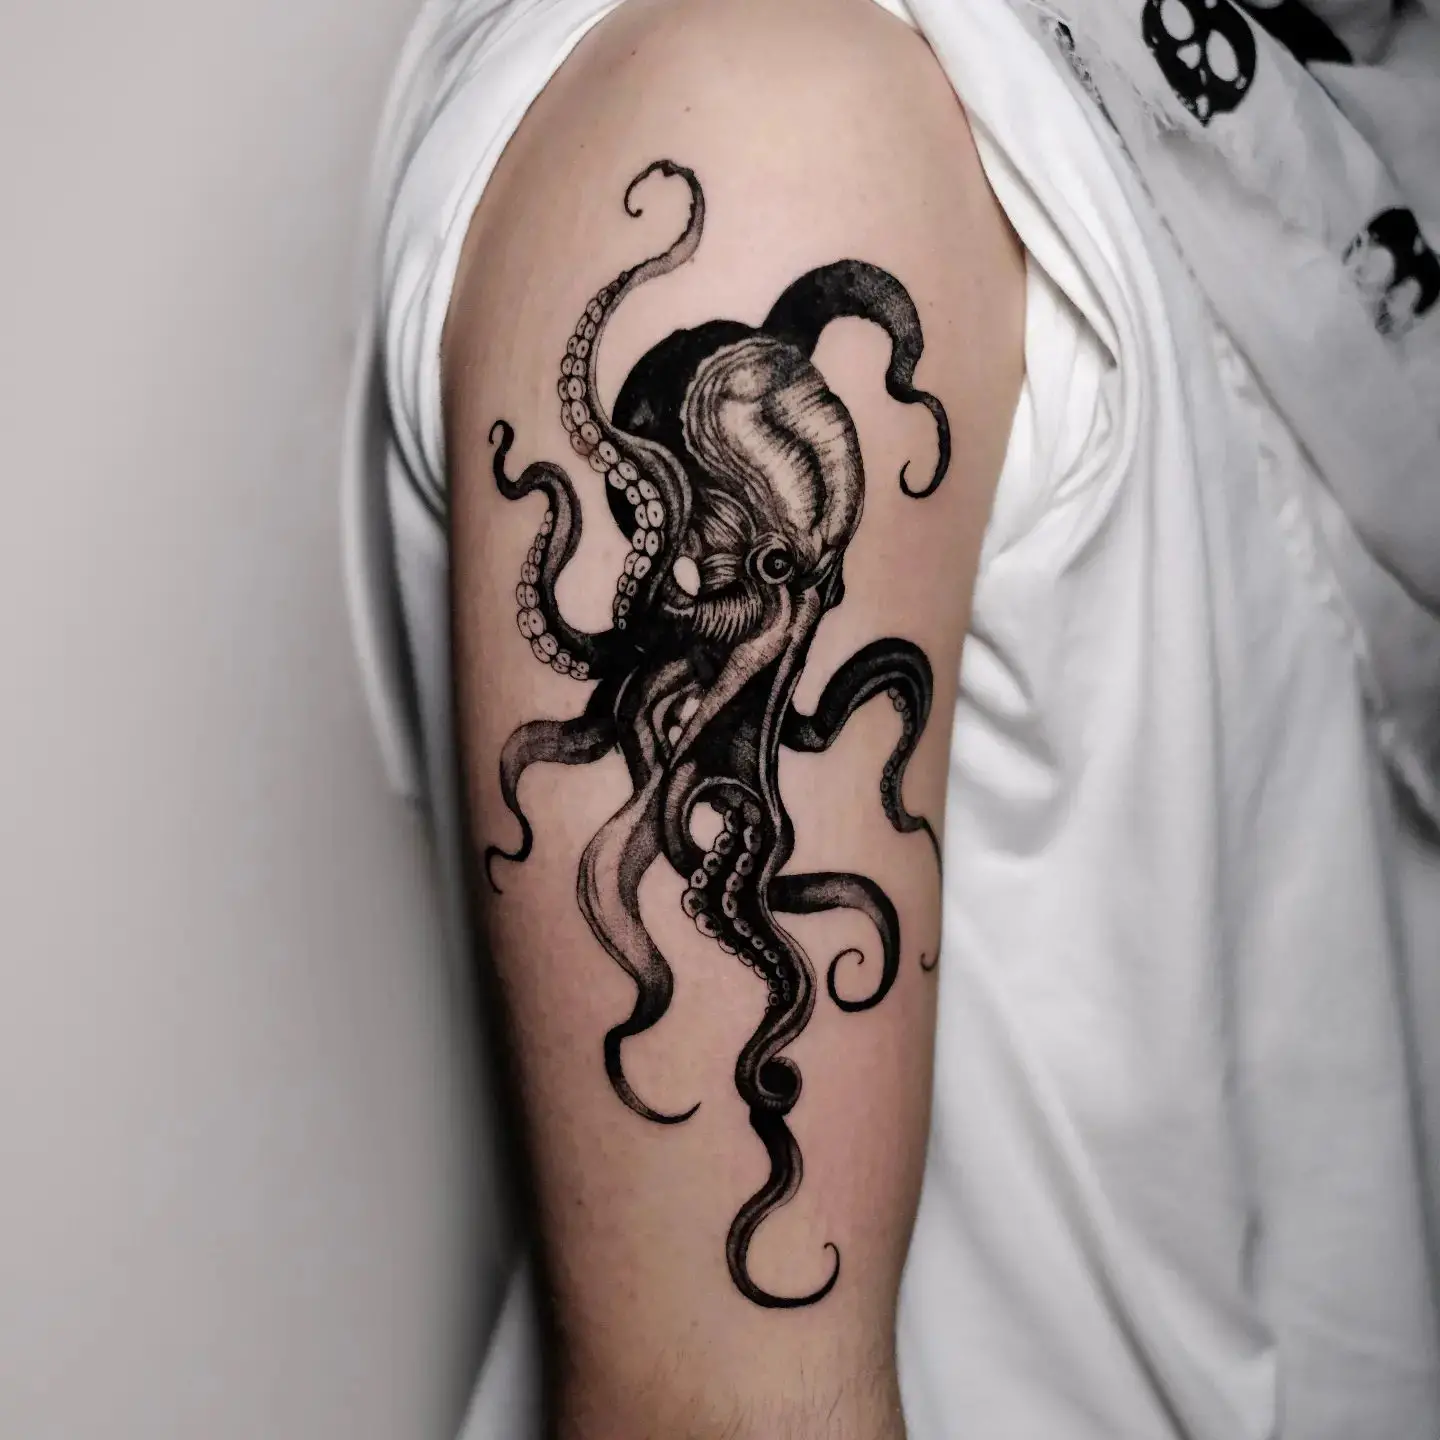 Black and white octopus tattoo by burcu.ink